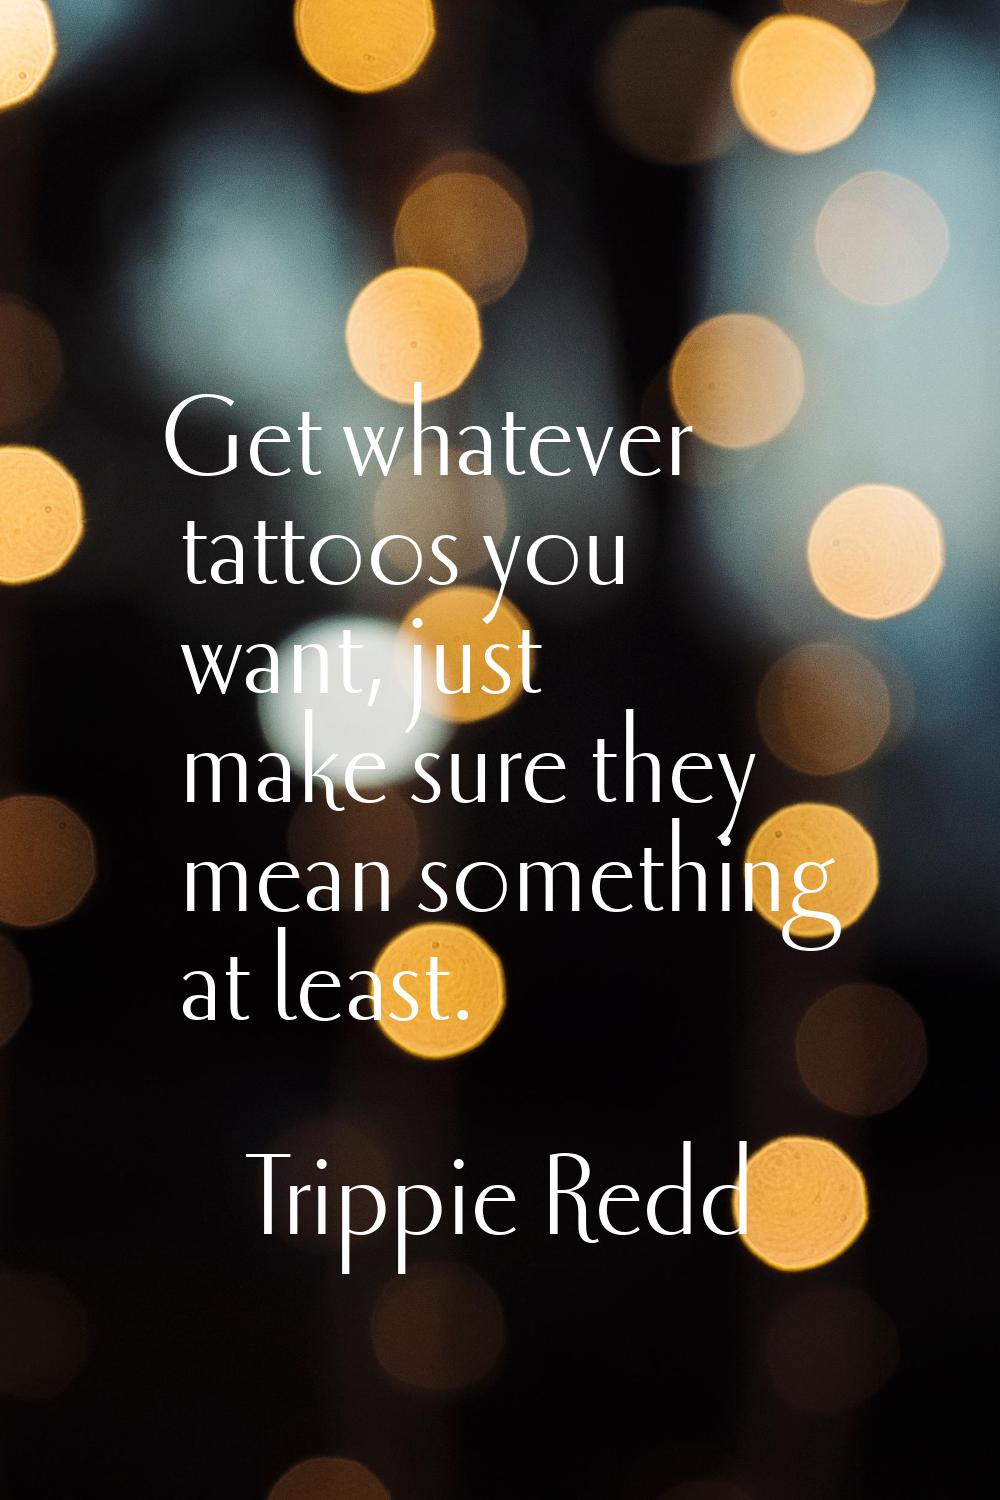 Get whatever tattoos you want, just make sure they mean something at least.